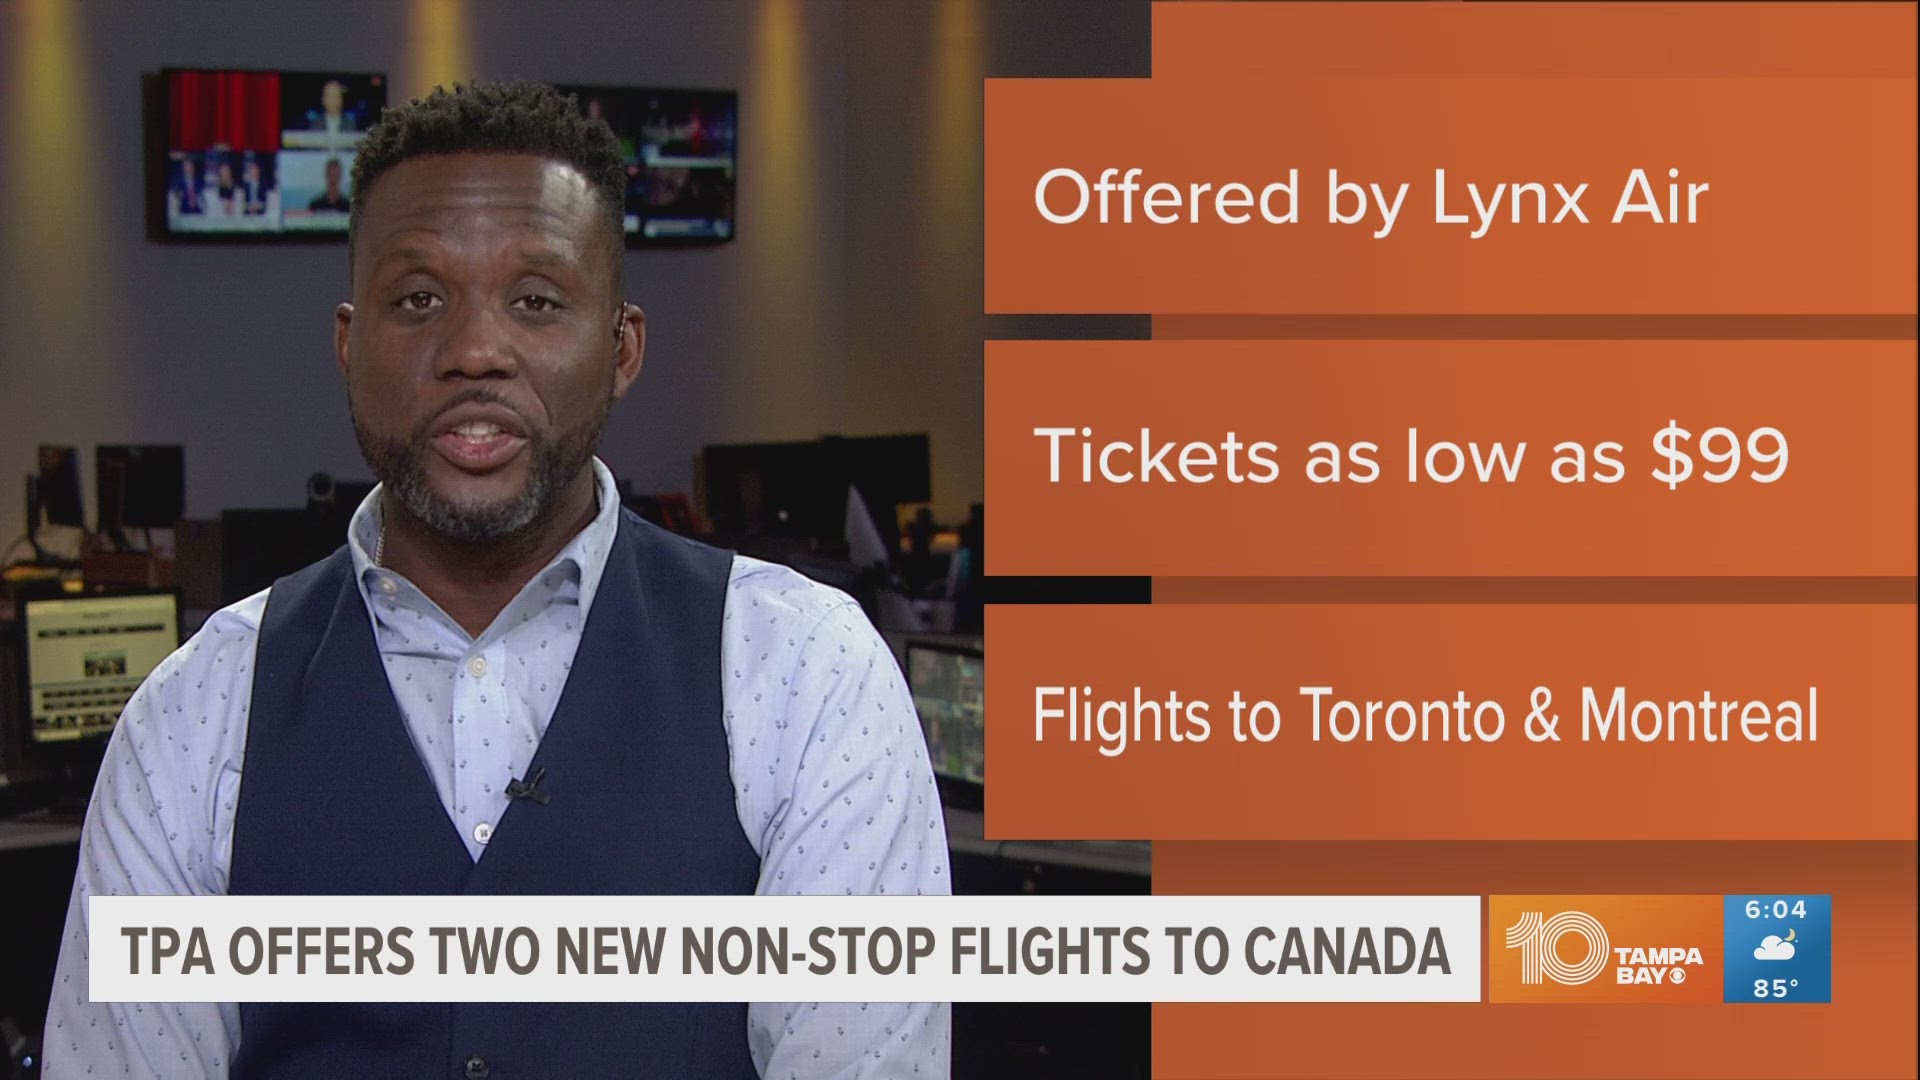 The Canadian-based airline Lyxn Air announced Friday it would have two nonstop routes from Tampa to Toronto and Montreal starting this fall.